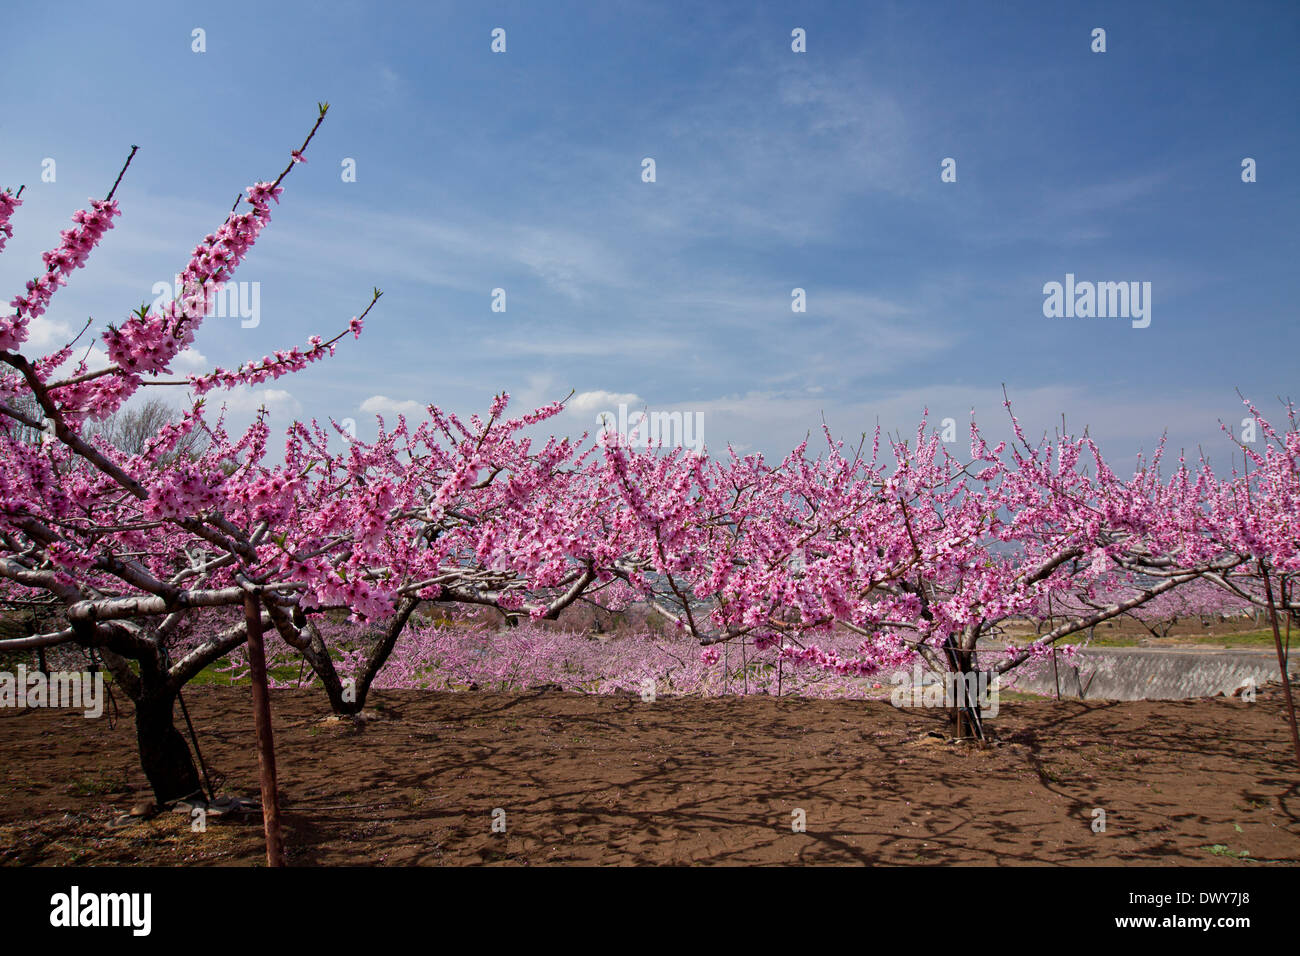 Plum blossoms in Yamanashi Prefecture, Japan Stock Photo